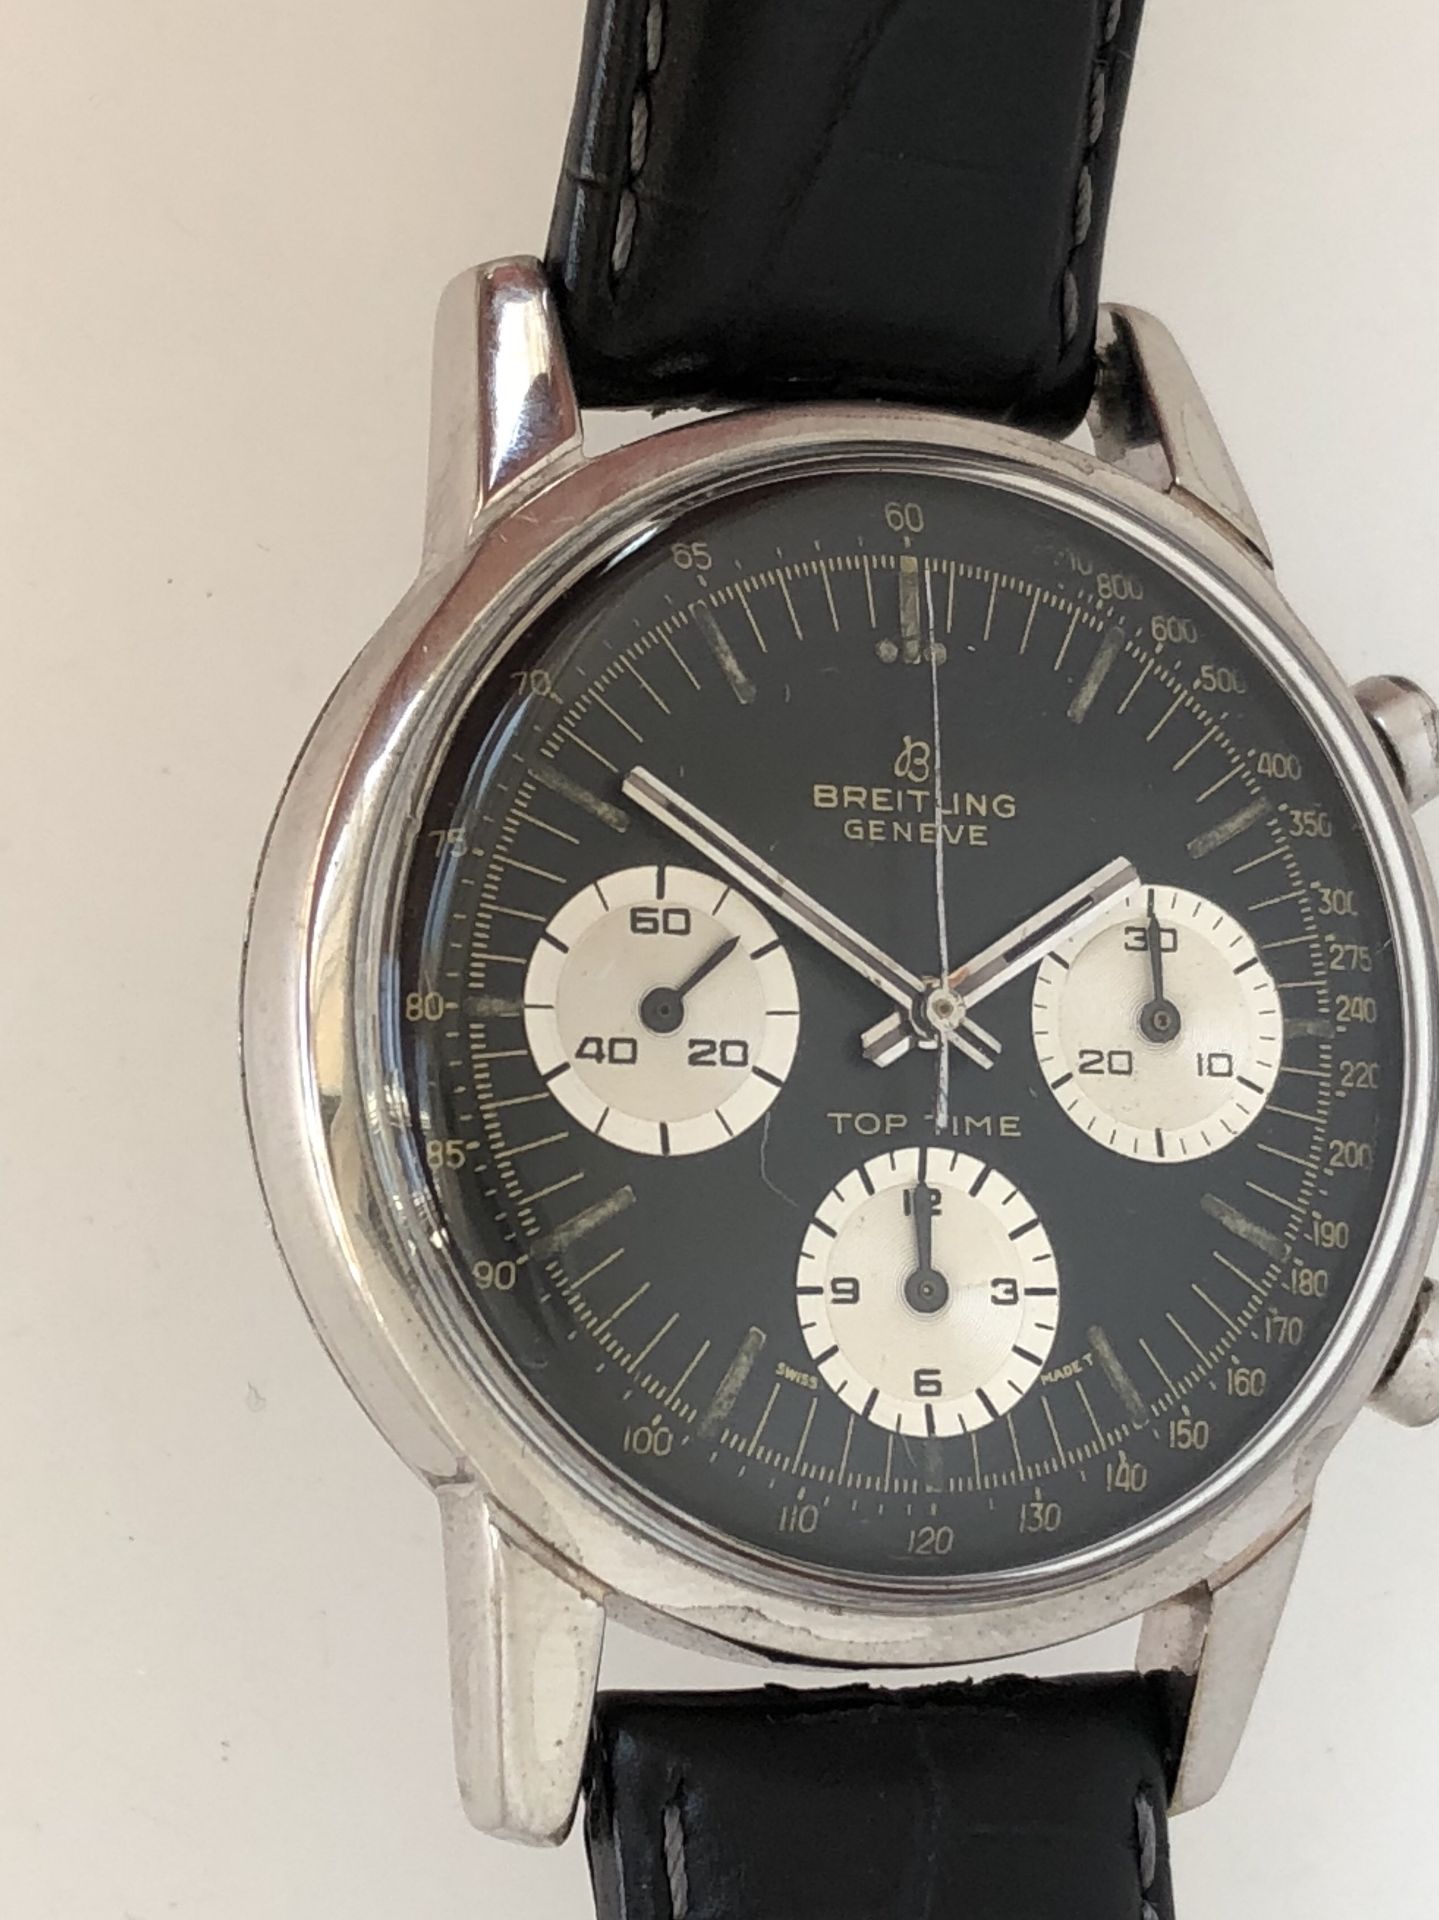 1968 Reverse Panda Dial Breitling Top Time 810 Chronograph - Image 2 of 3